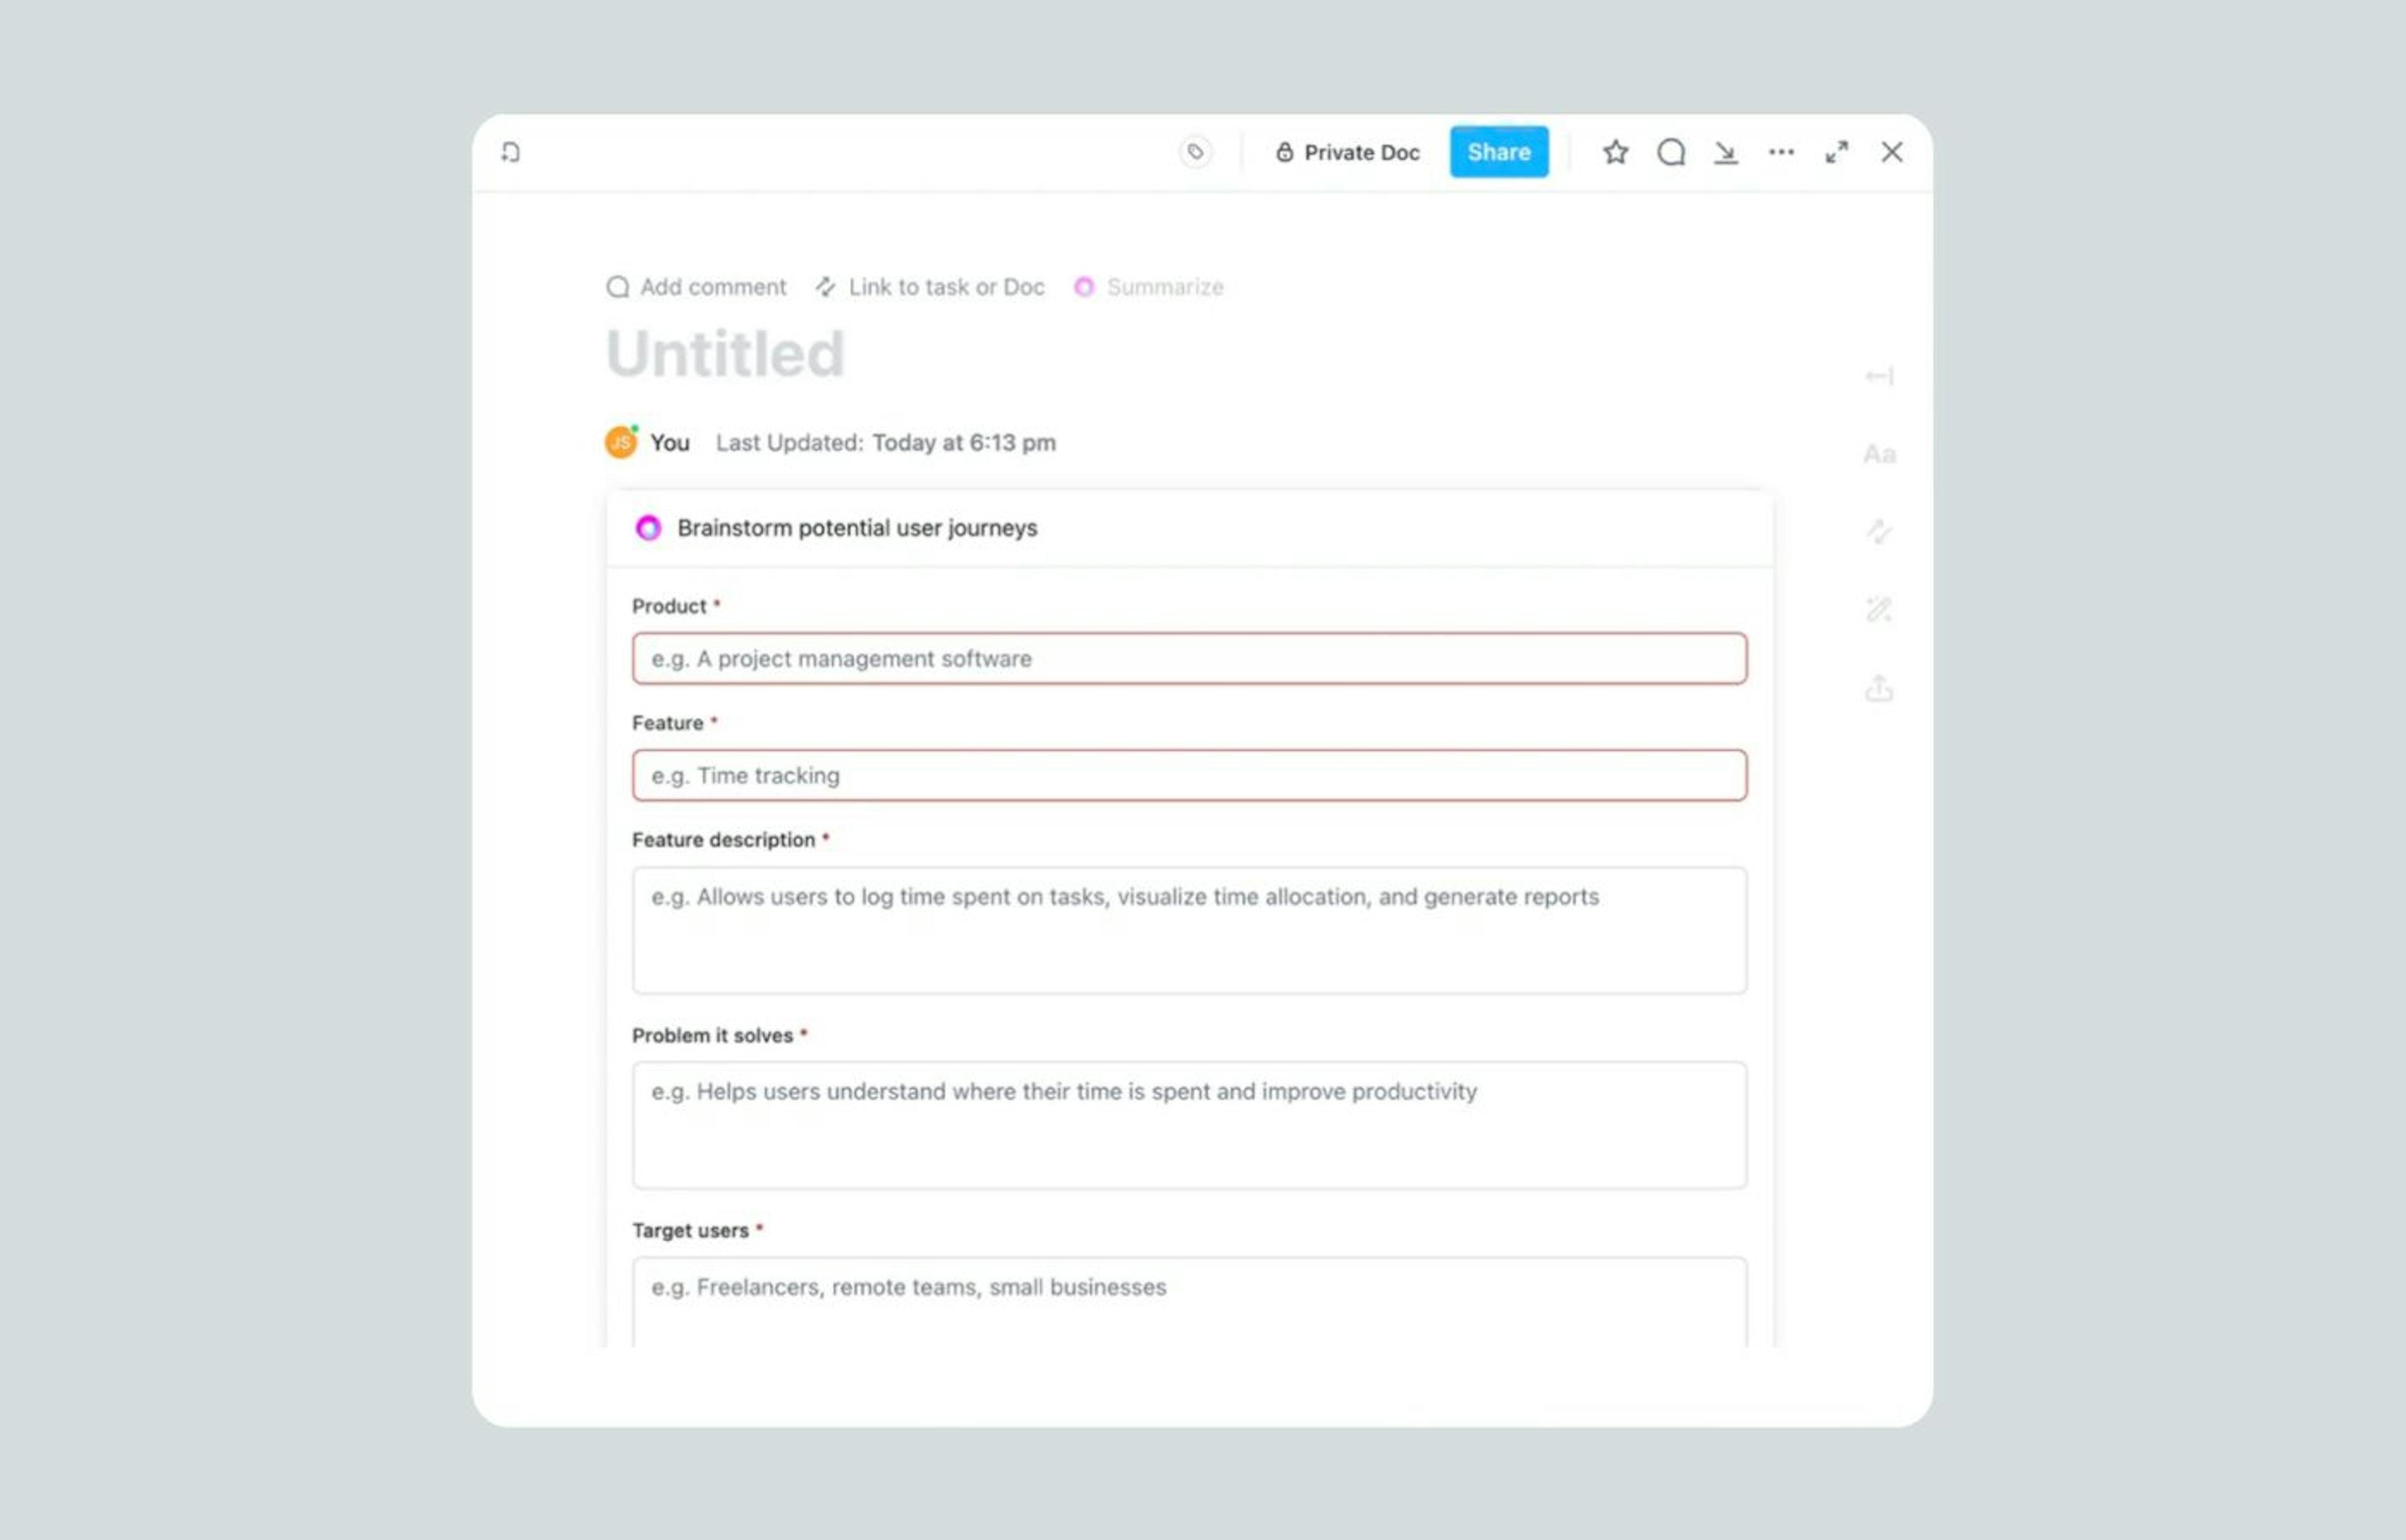 ClickUp lets users fill up the form to create a detailed prompt due to the context of its workflow